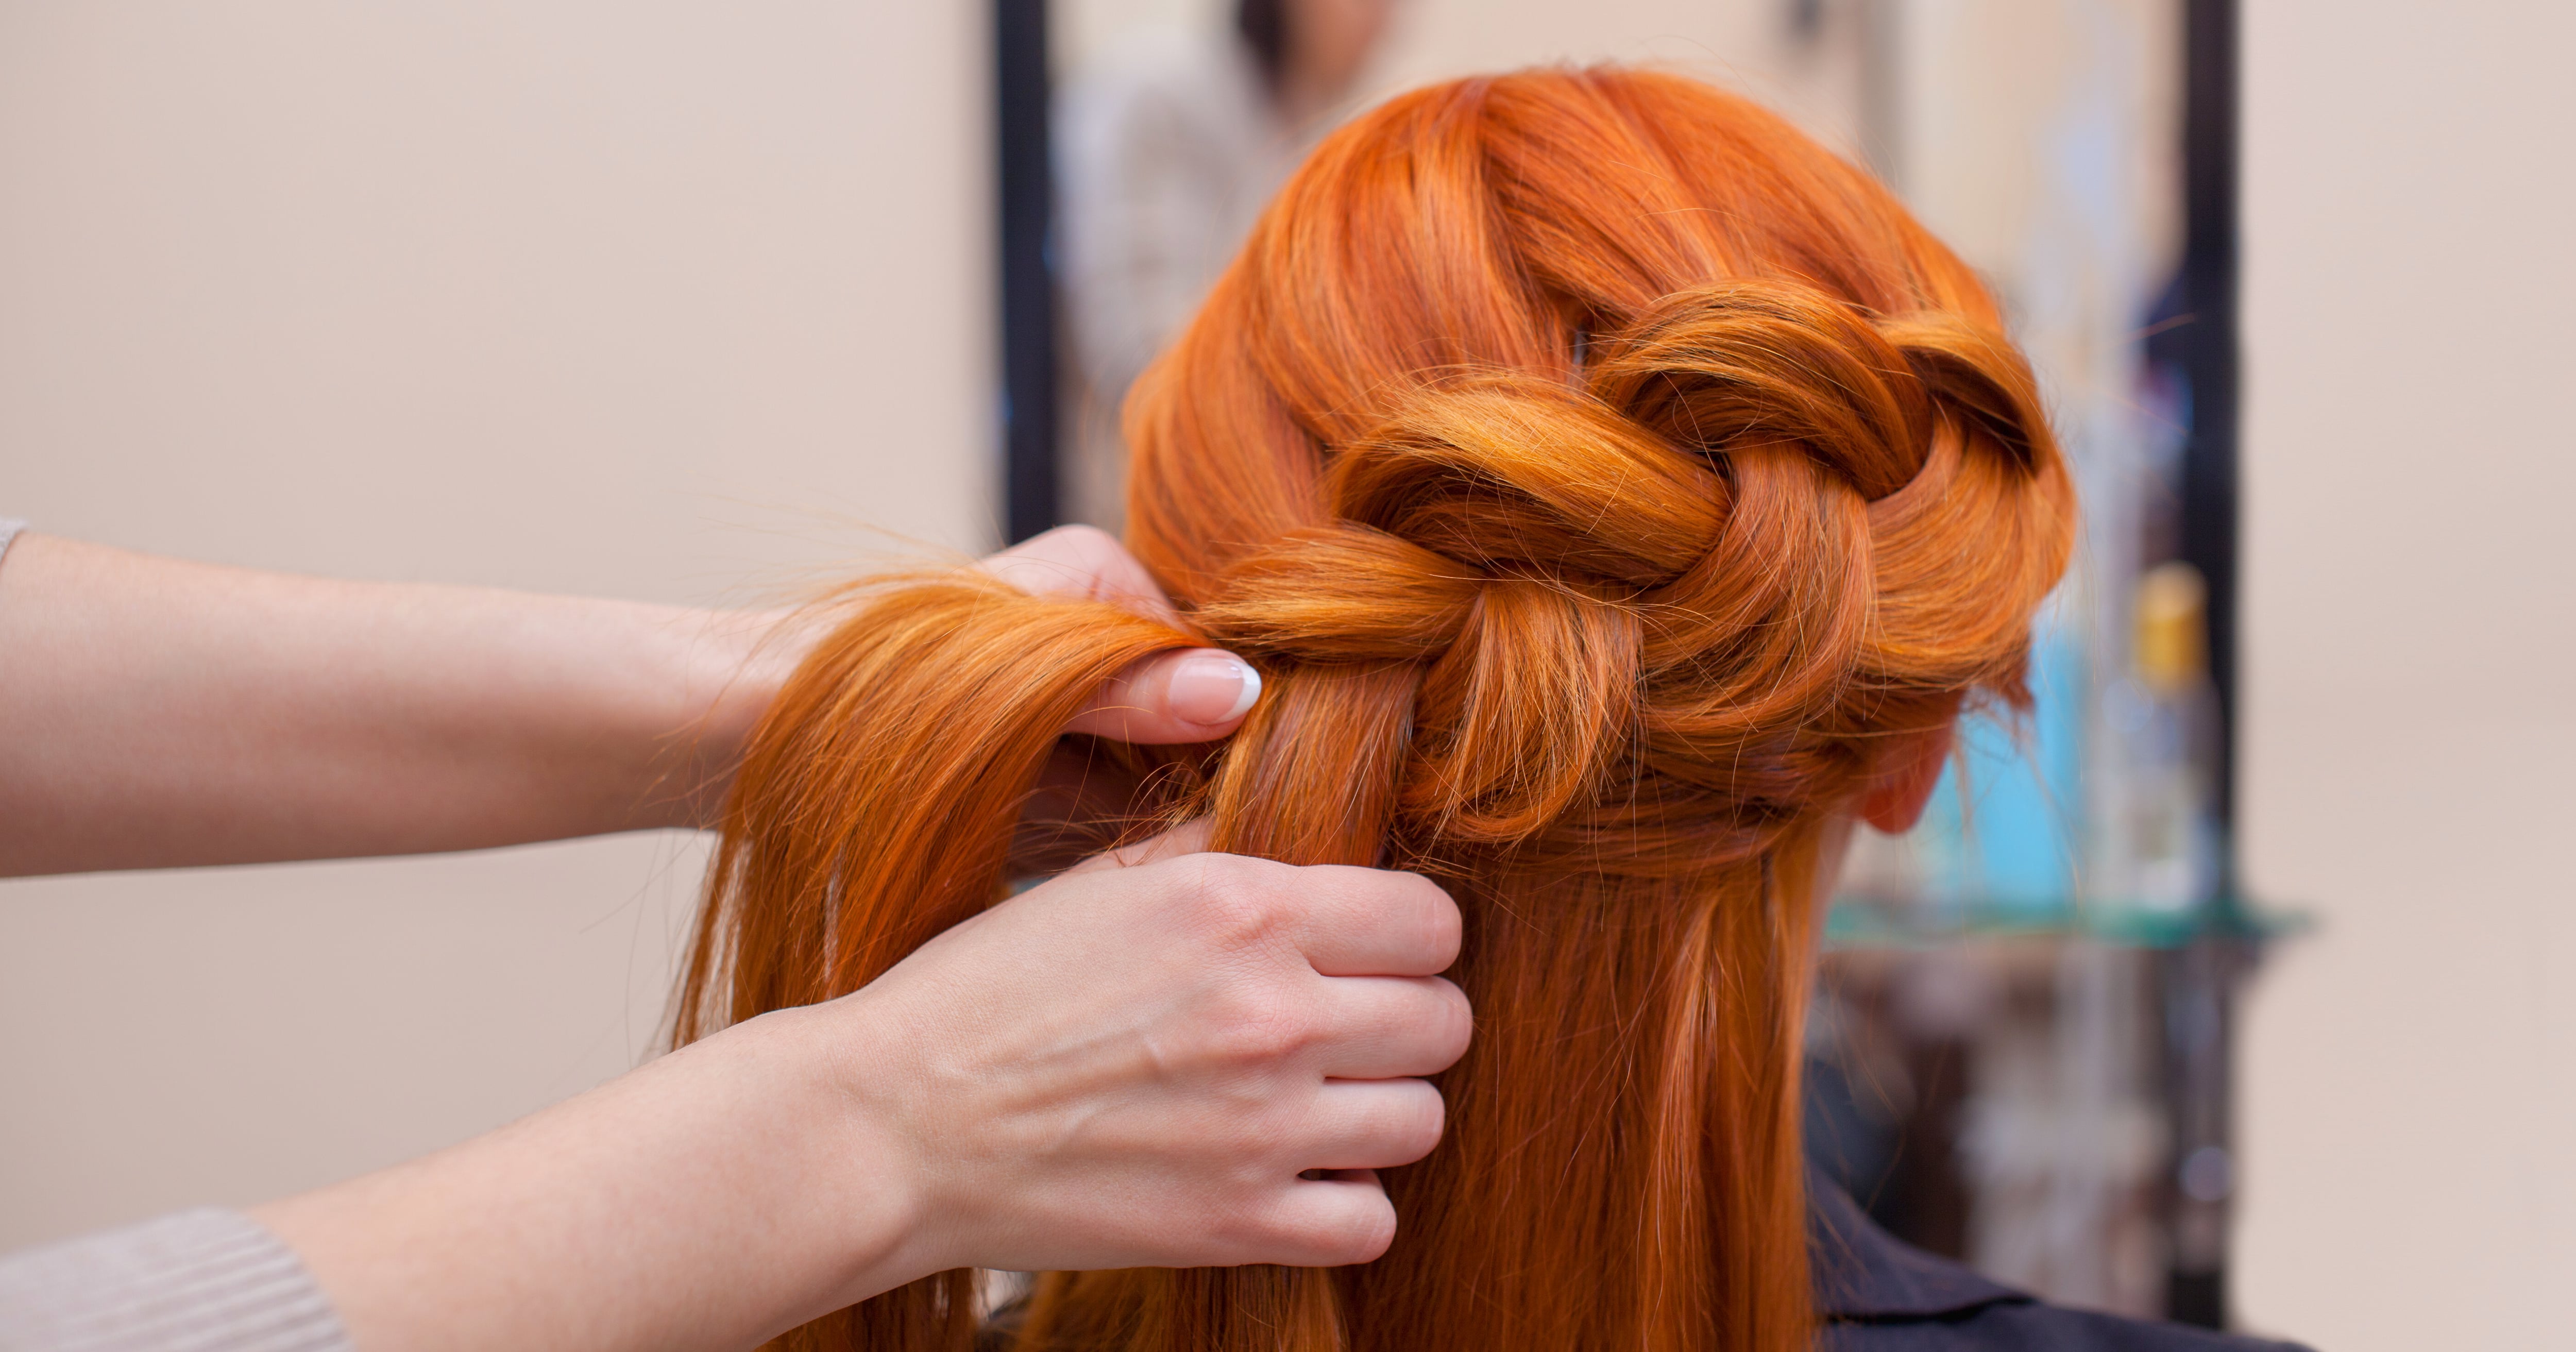 How to Braid Hair — Step-by-Step Photos and Video Tutorials